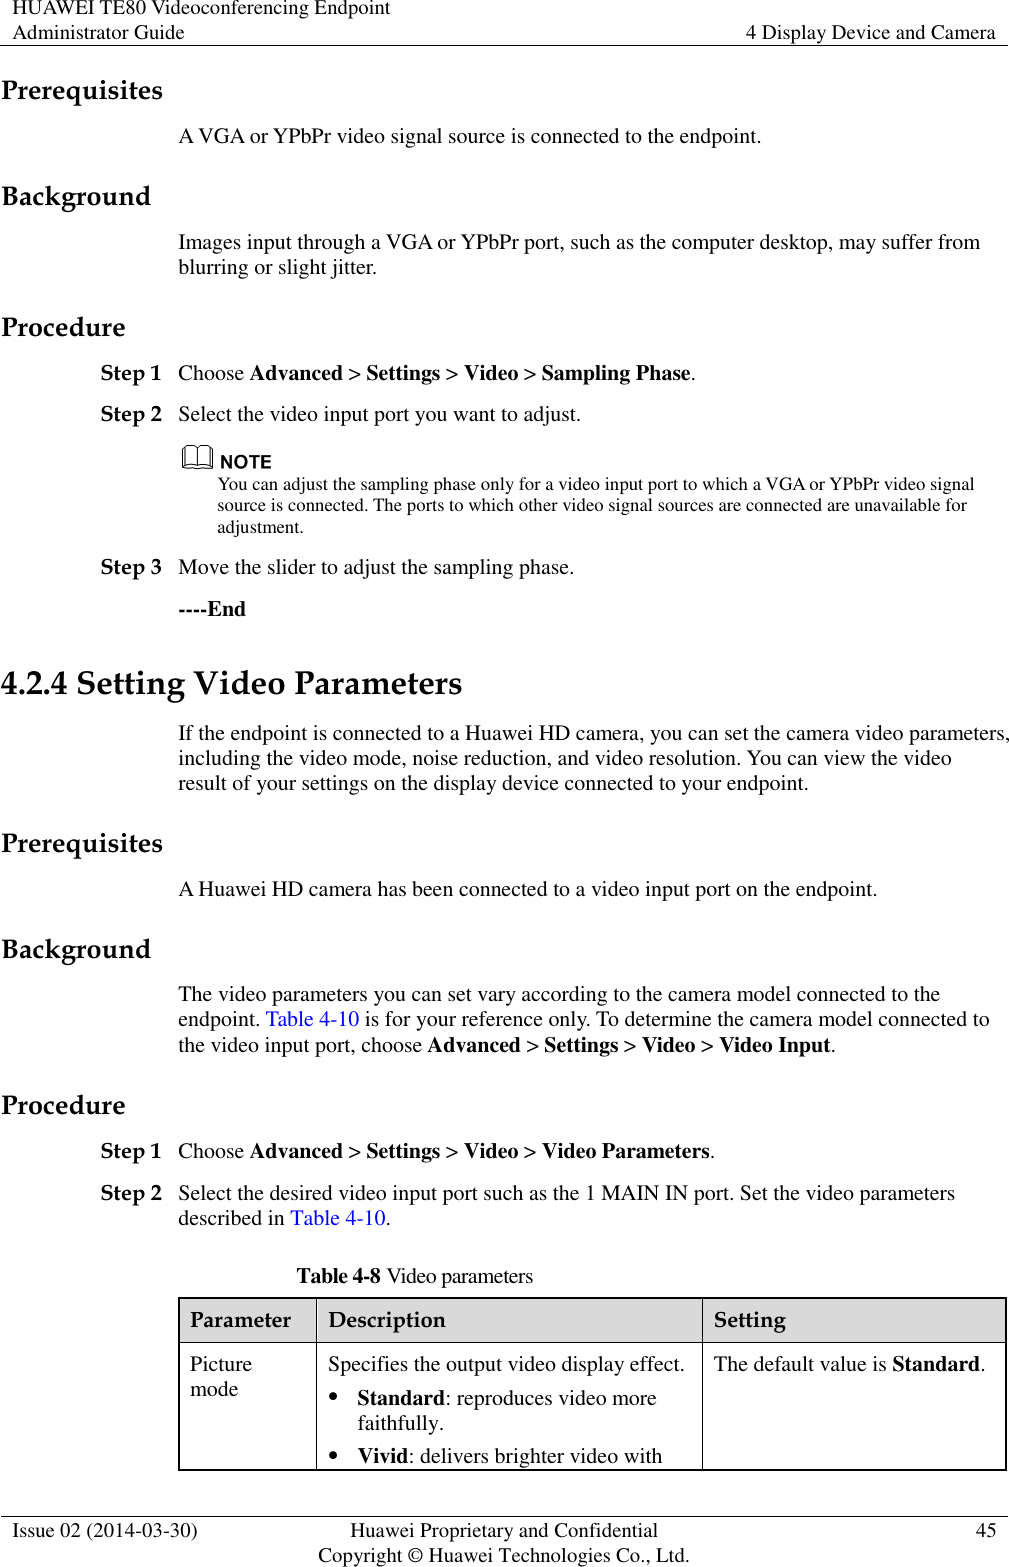 HUAWEI TE80 Videoconferencing Endpoint Administrator Guide 4 Display Device and Camera  Issue 02 (2014-03-30) Huawei Proprietary and Confidential Copyright © Huawei Technologies Co., Ltd. 45  Prerequisites A VGA or YPbPr video signal source is connected to the endpoint. Background Images input through a VGA or YPbPr port, such as the computer desktop, may suffer from blurring or slight jitter.   Procedure Step 1 Choose Advanced &gt; Settings &gt; Video &gt; Sampling Phase. Step 2 Select the video input port you want to adjust.  You can adjust the sampling phase only for a video input port to which a VGA or YPbPr video signal source is connected. The ports to which other video signal sources are connected are unavailable for adjustment. Step 3 Move the slider to adjust the sampling phase. ----End 4.2.4 Setting Video Parameters If the endpoint is connected to a Huawei HD camera, you can set the camera video parameters, including the video mode, noise reduction, and video resolution. You can view the video result of your settings on the display device connected to your endpoint. Prerequisites A Huawei HD camera has been connected to a video input port on the endpoint. Background The video parameters you can set vary according to the camera model connected to the endpoint. Table 4-10 is for your reference only. To determine the camera model connected to the video input port, choose Advanced &gt; Settings &gt; Video &gt; Video Input.   Procedure Step 1 Choose Advanced &gt; Settings &gt; Video &gt; Video Parameters. Step 2 Select the desired video input port such as the 1 MAIN IN port. Set the video parameters described in Table 4-10. Table 4-8 Video parameters Parameter Description Setting Picture mode Specifies the output video display effect.    Standard: reproduces video more faithfully.  Vivid: delivers brighter video with The default value is Standard. 